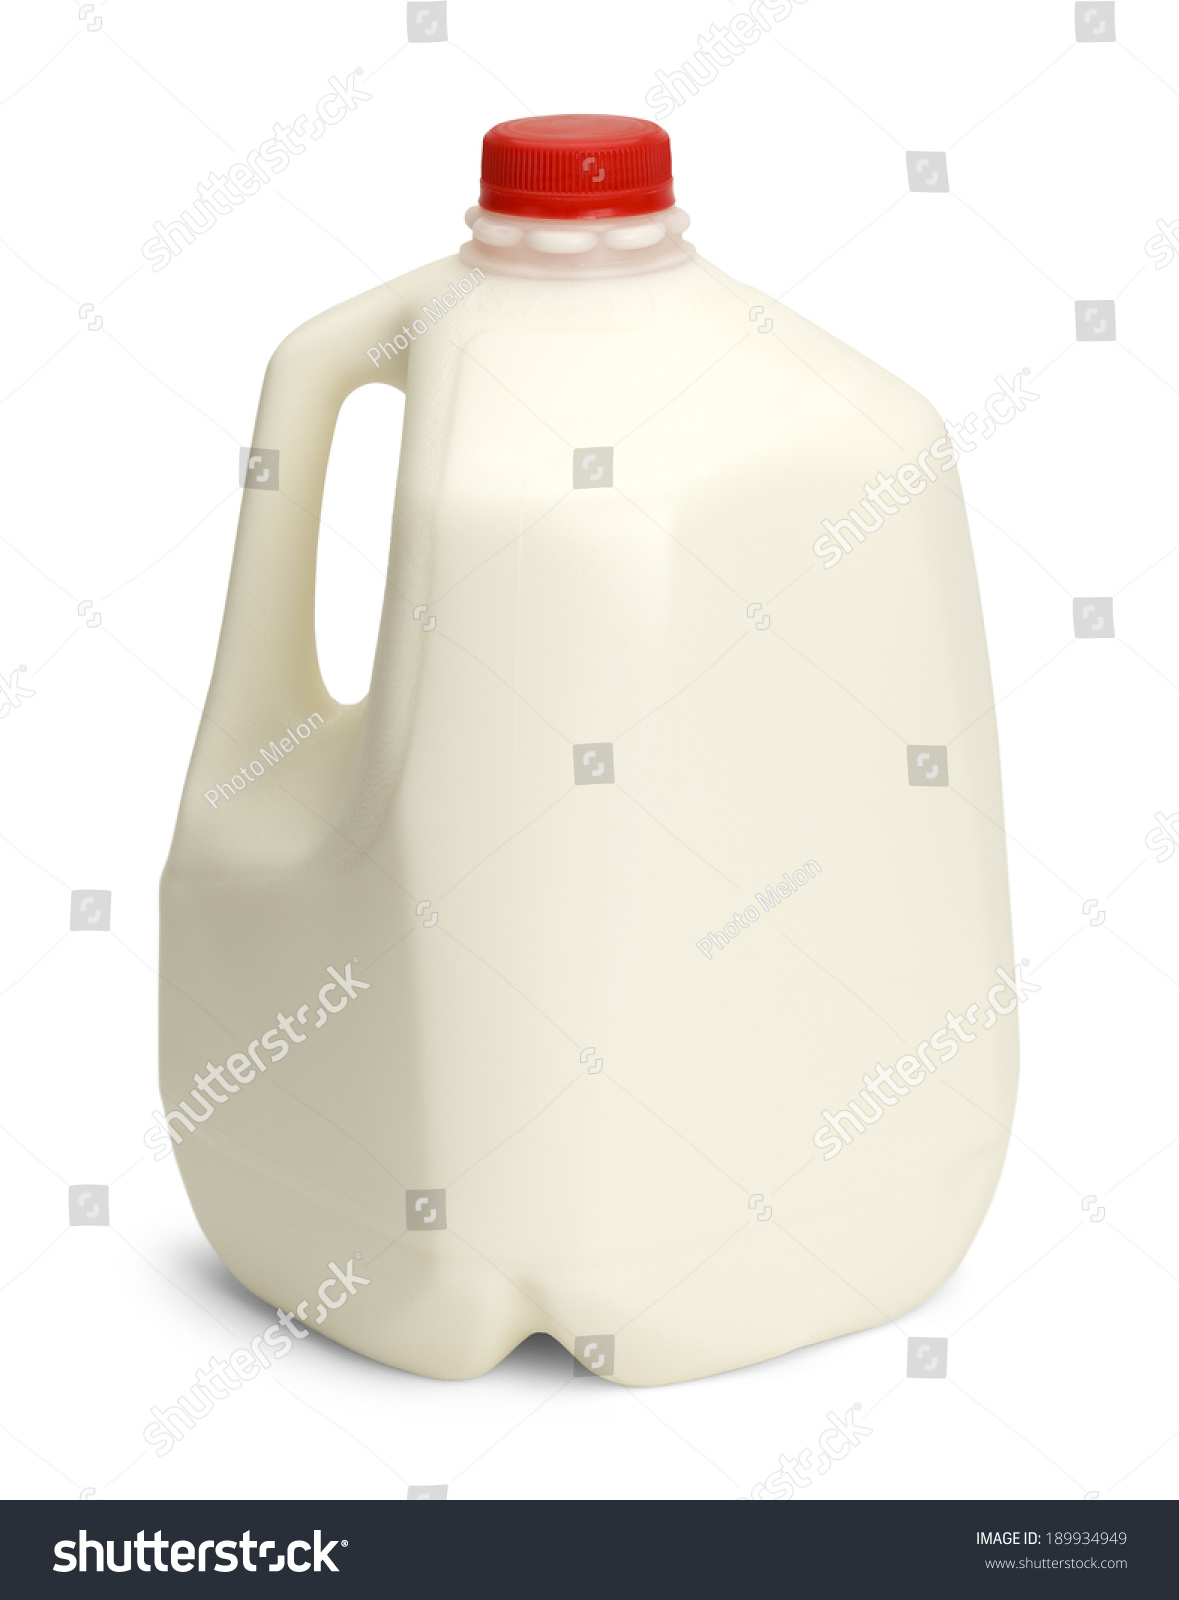 Gallon of Whole Milk with Red Plastic Cap Isolated on White Background. #189934949